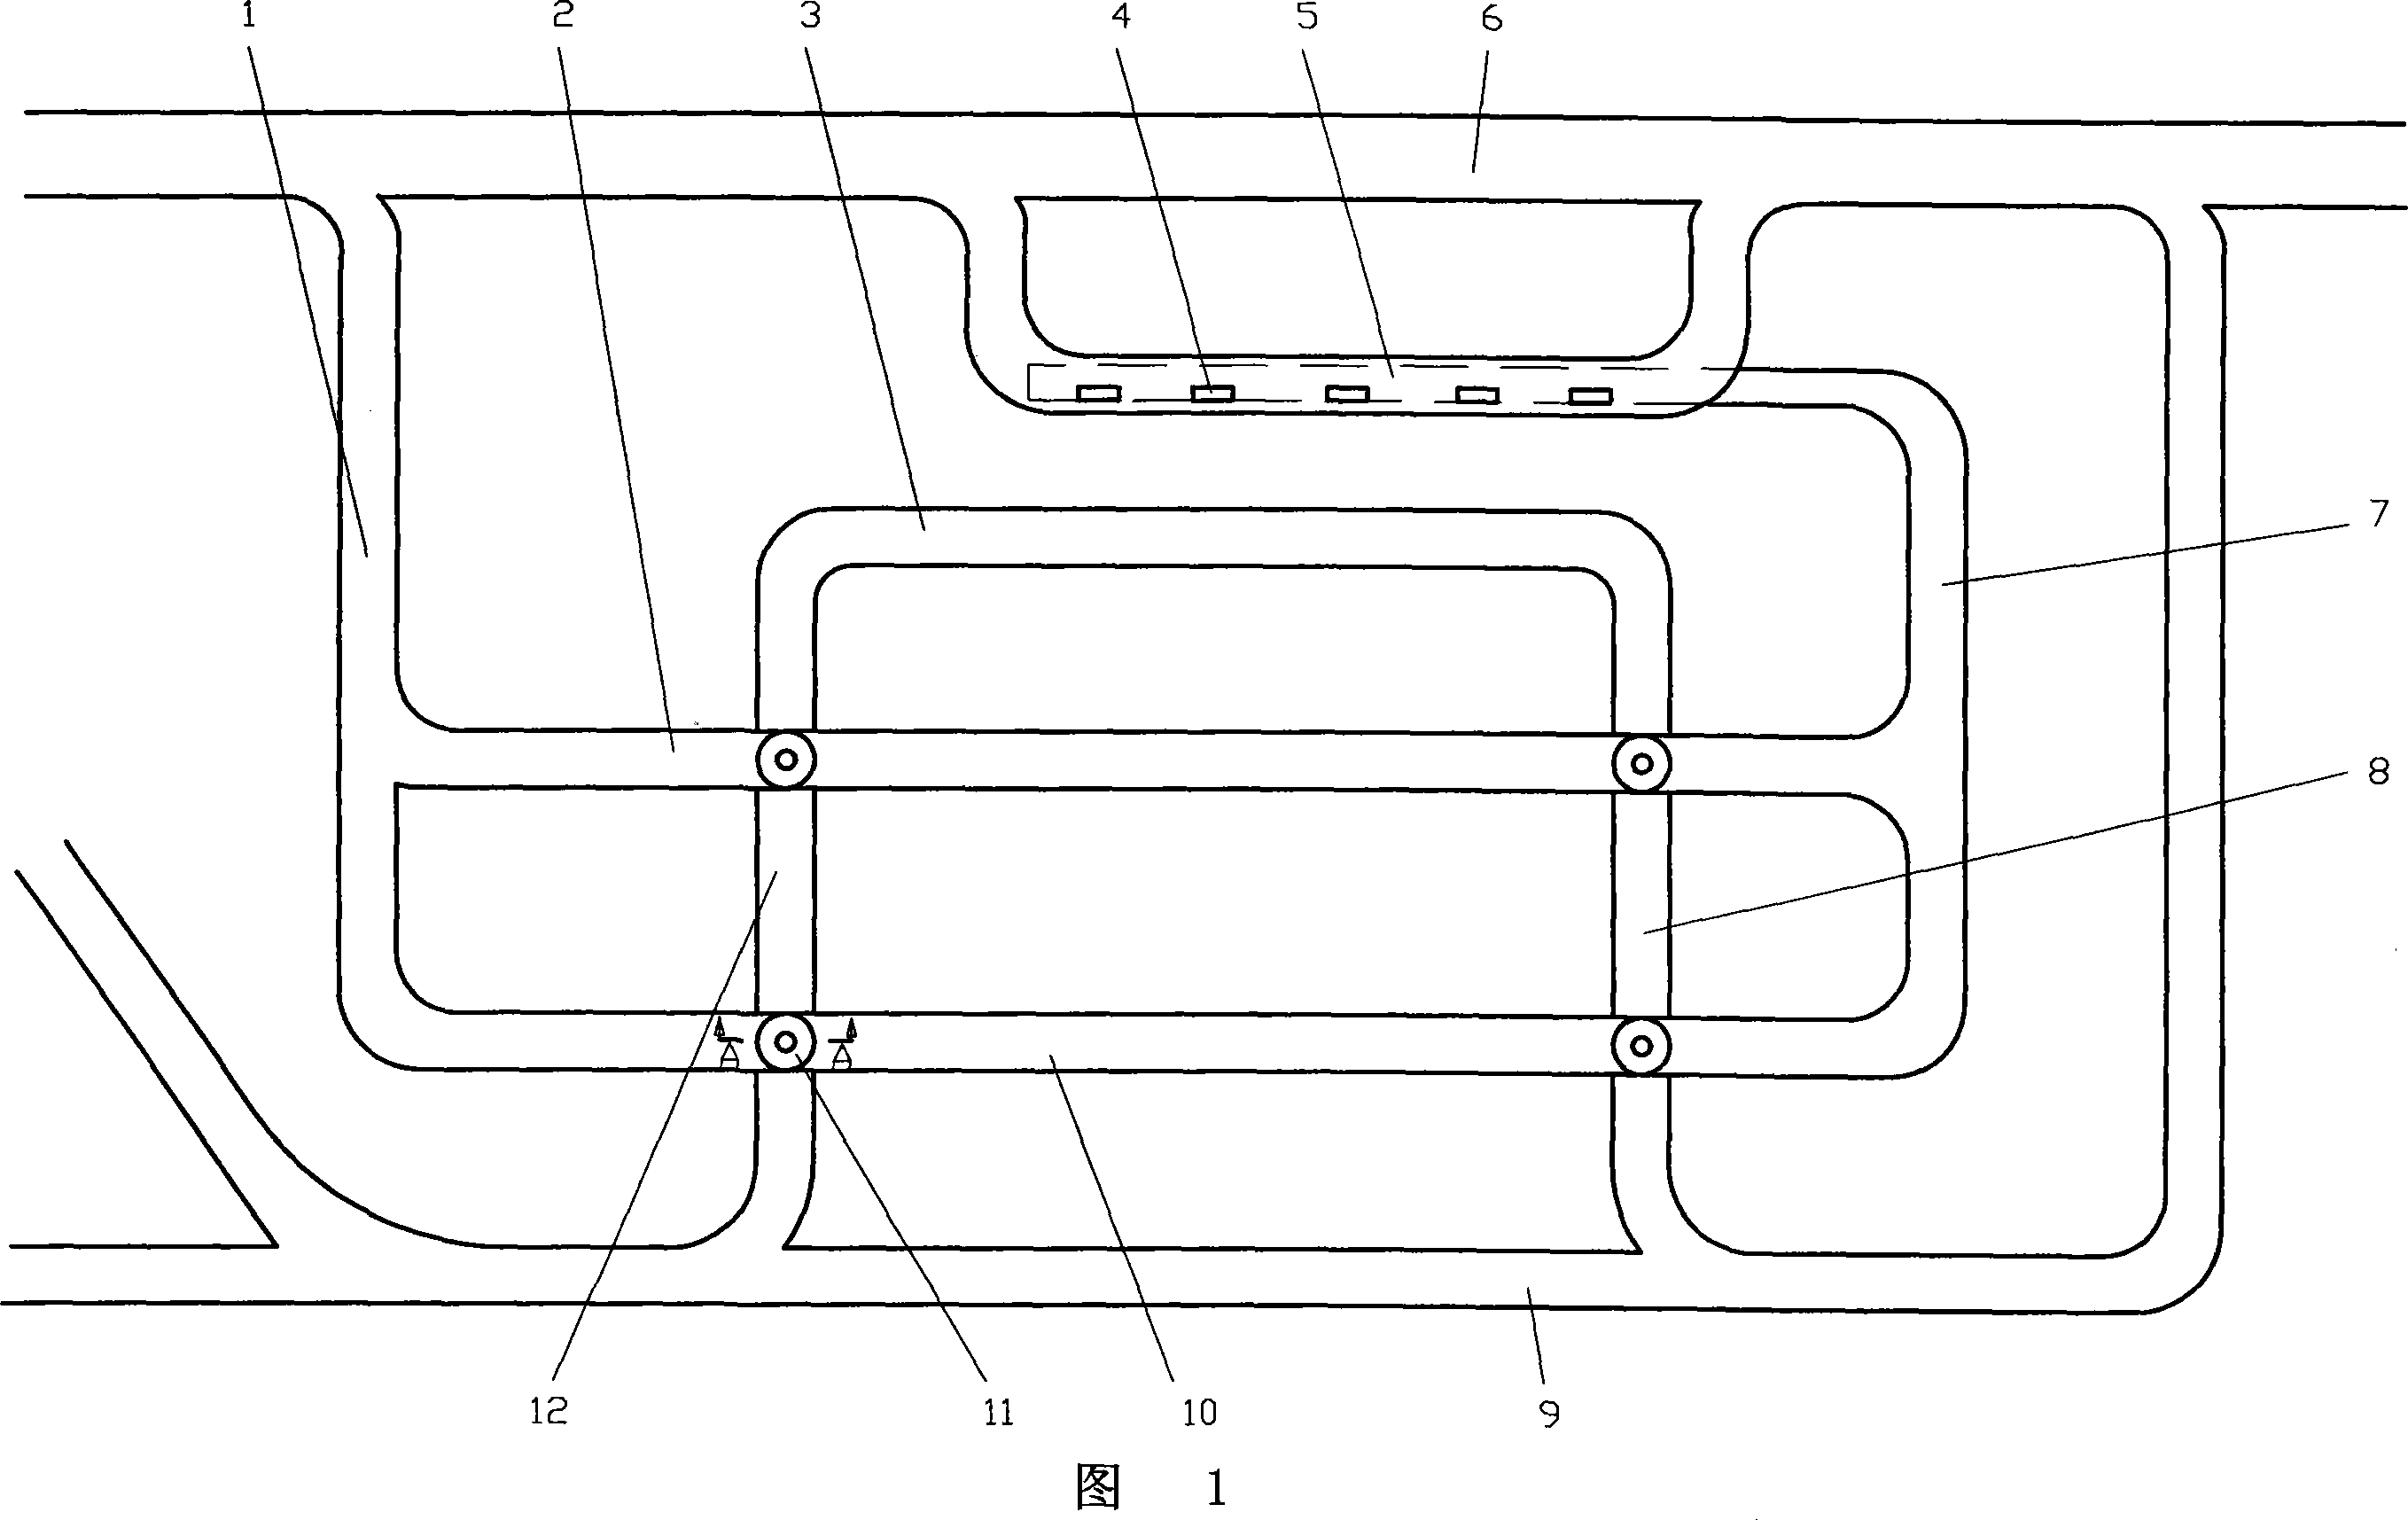 Apparatus for cleaning and transporting coal-mine water sump slurry